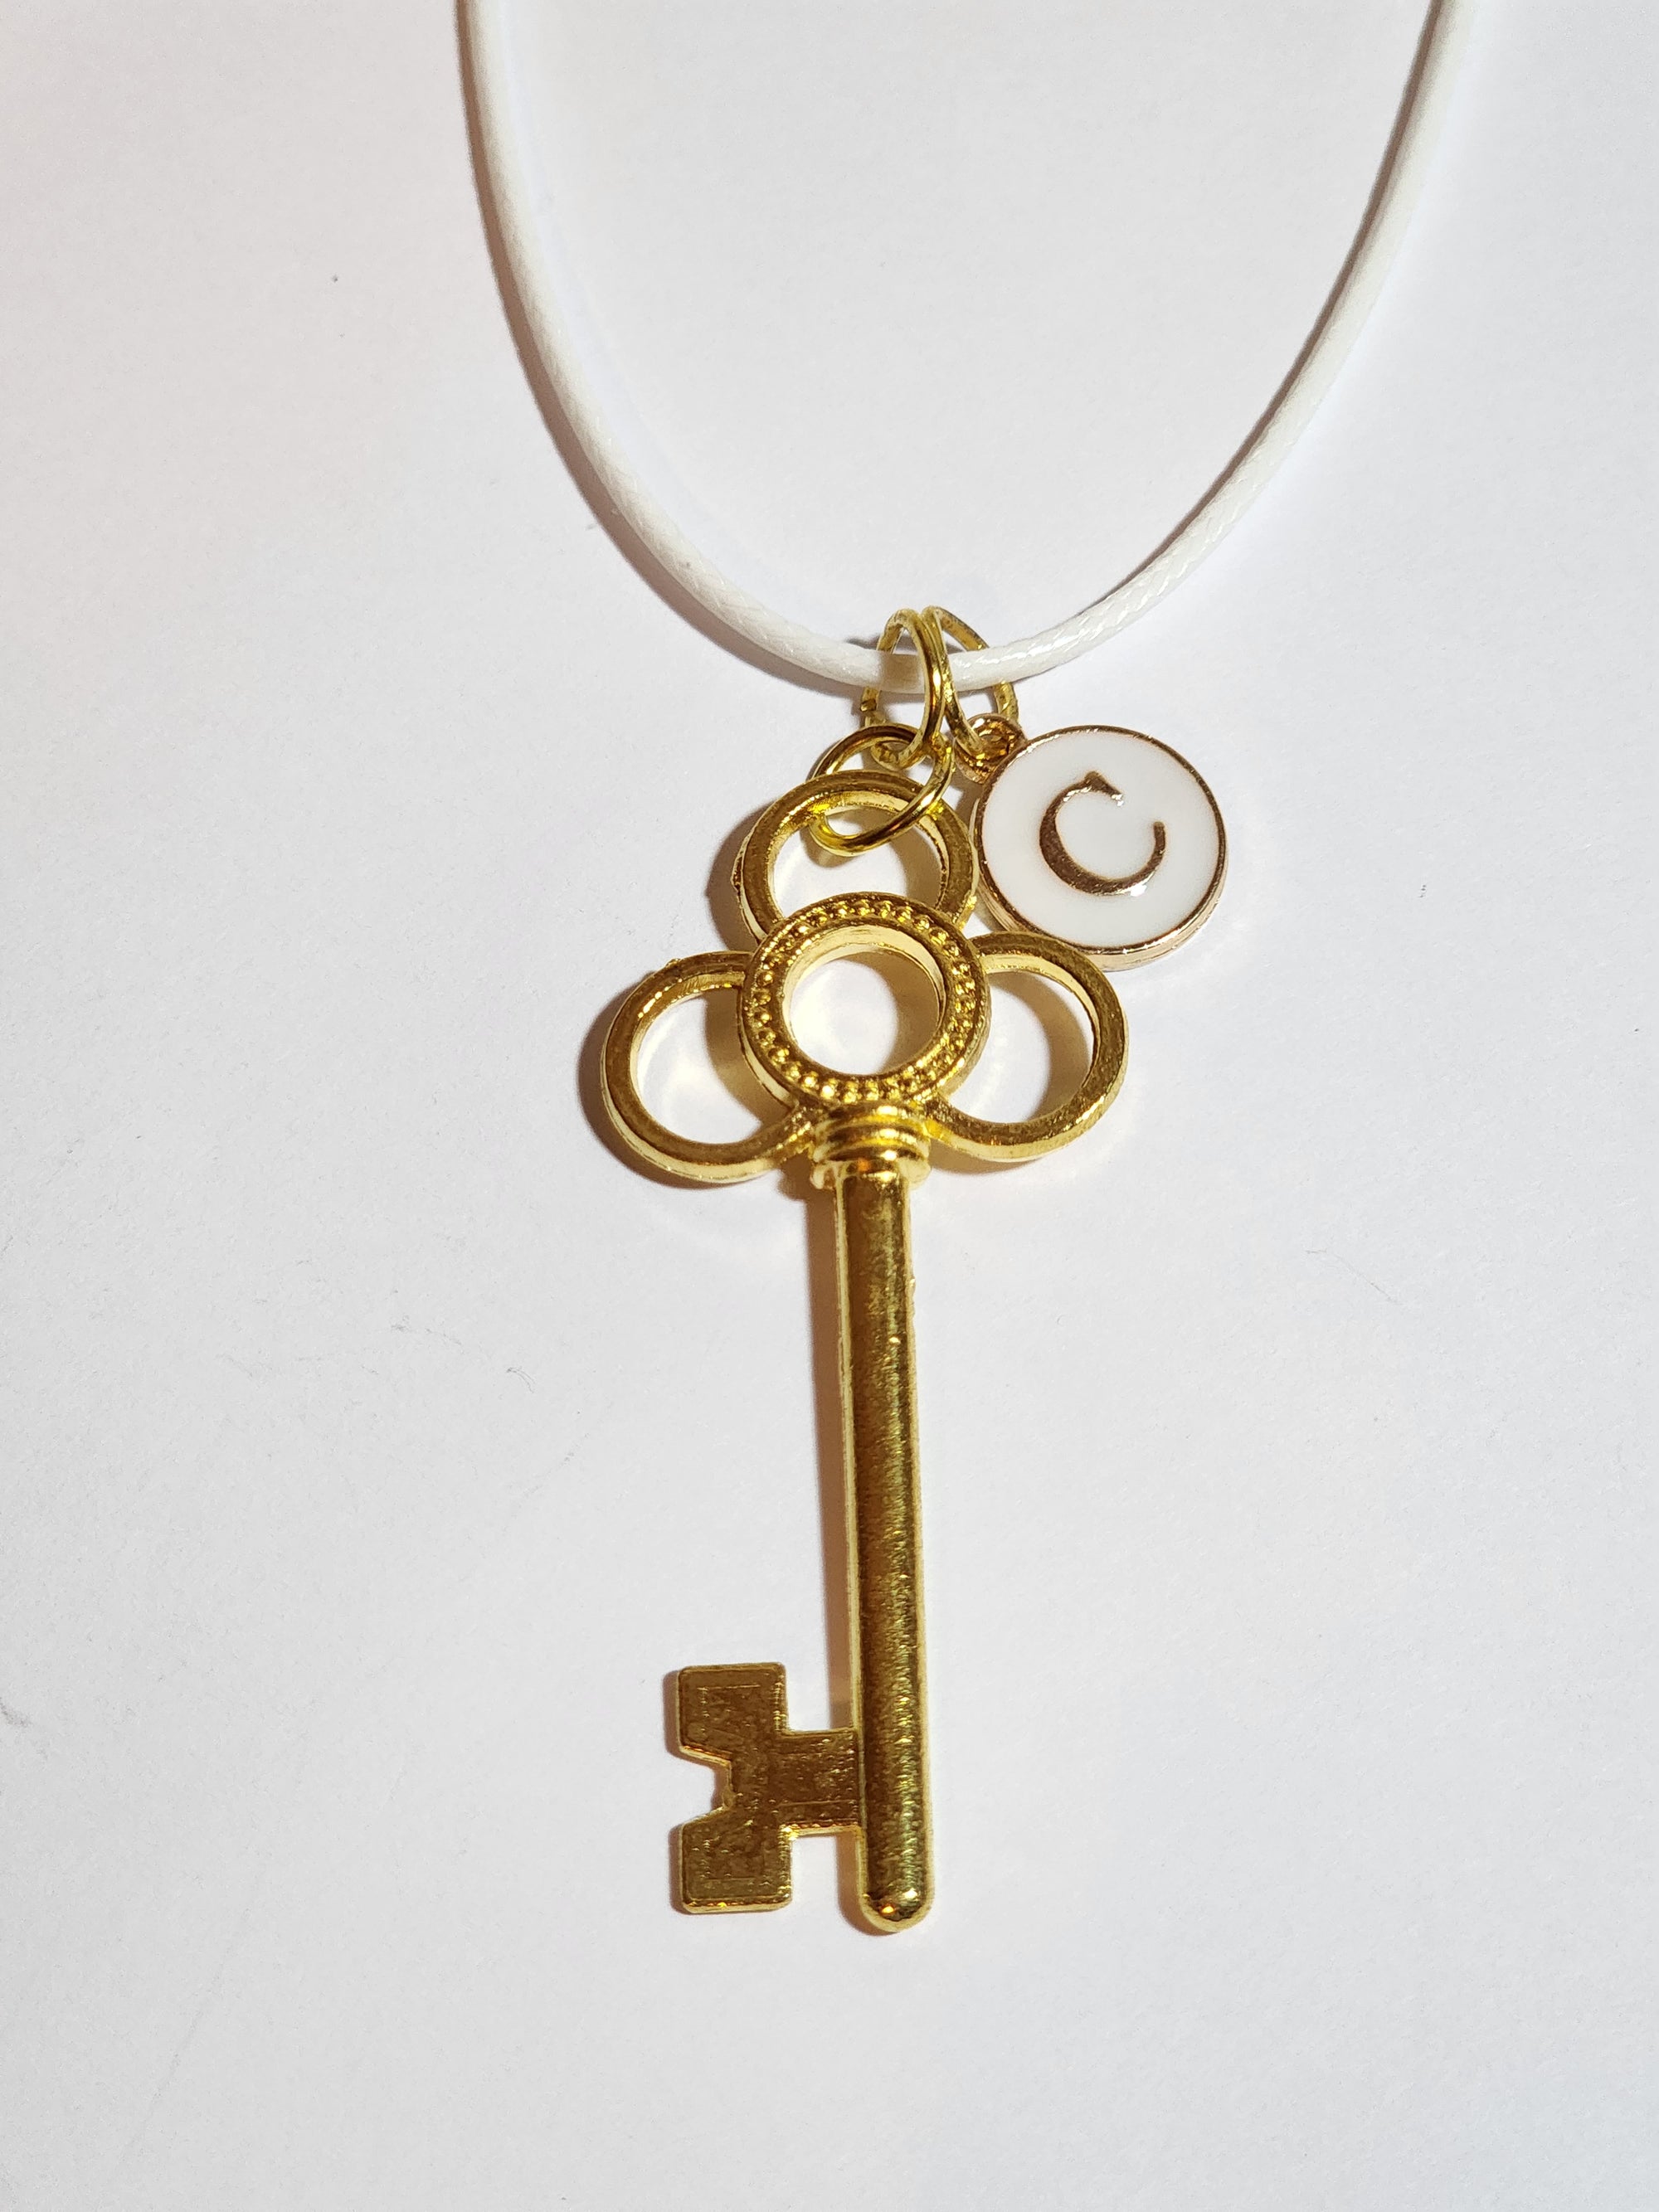 Gold club key necklace with letter